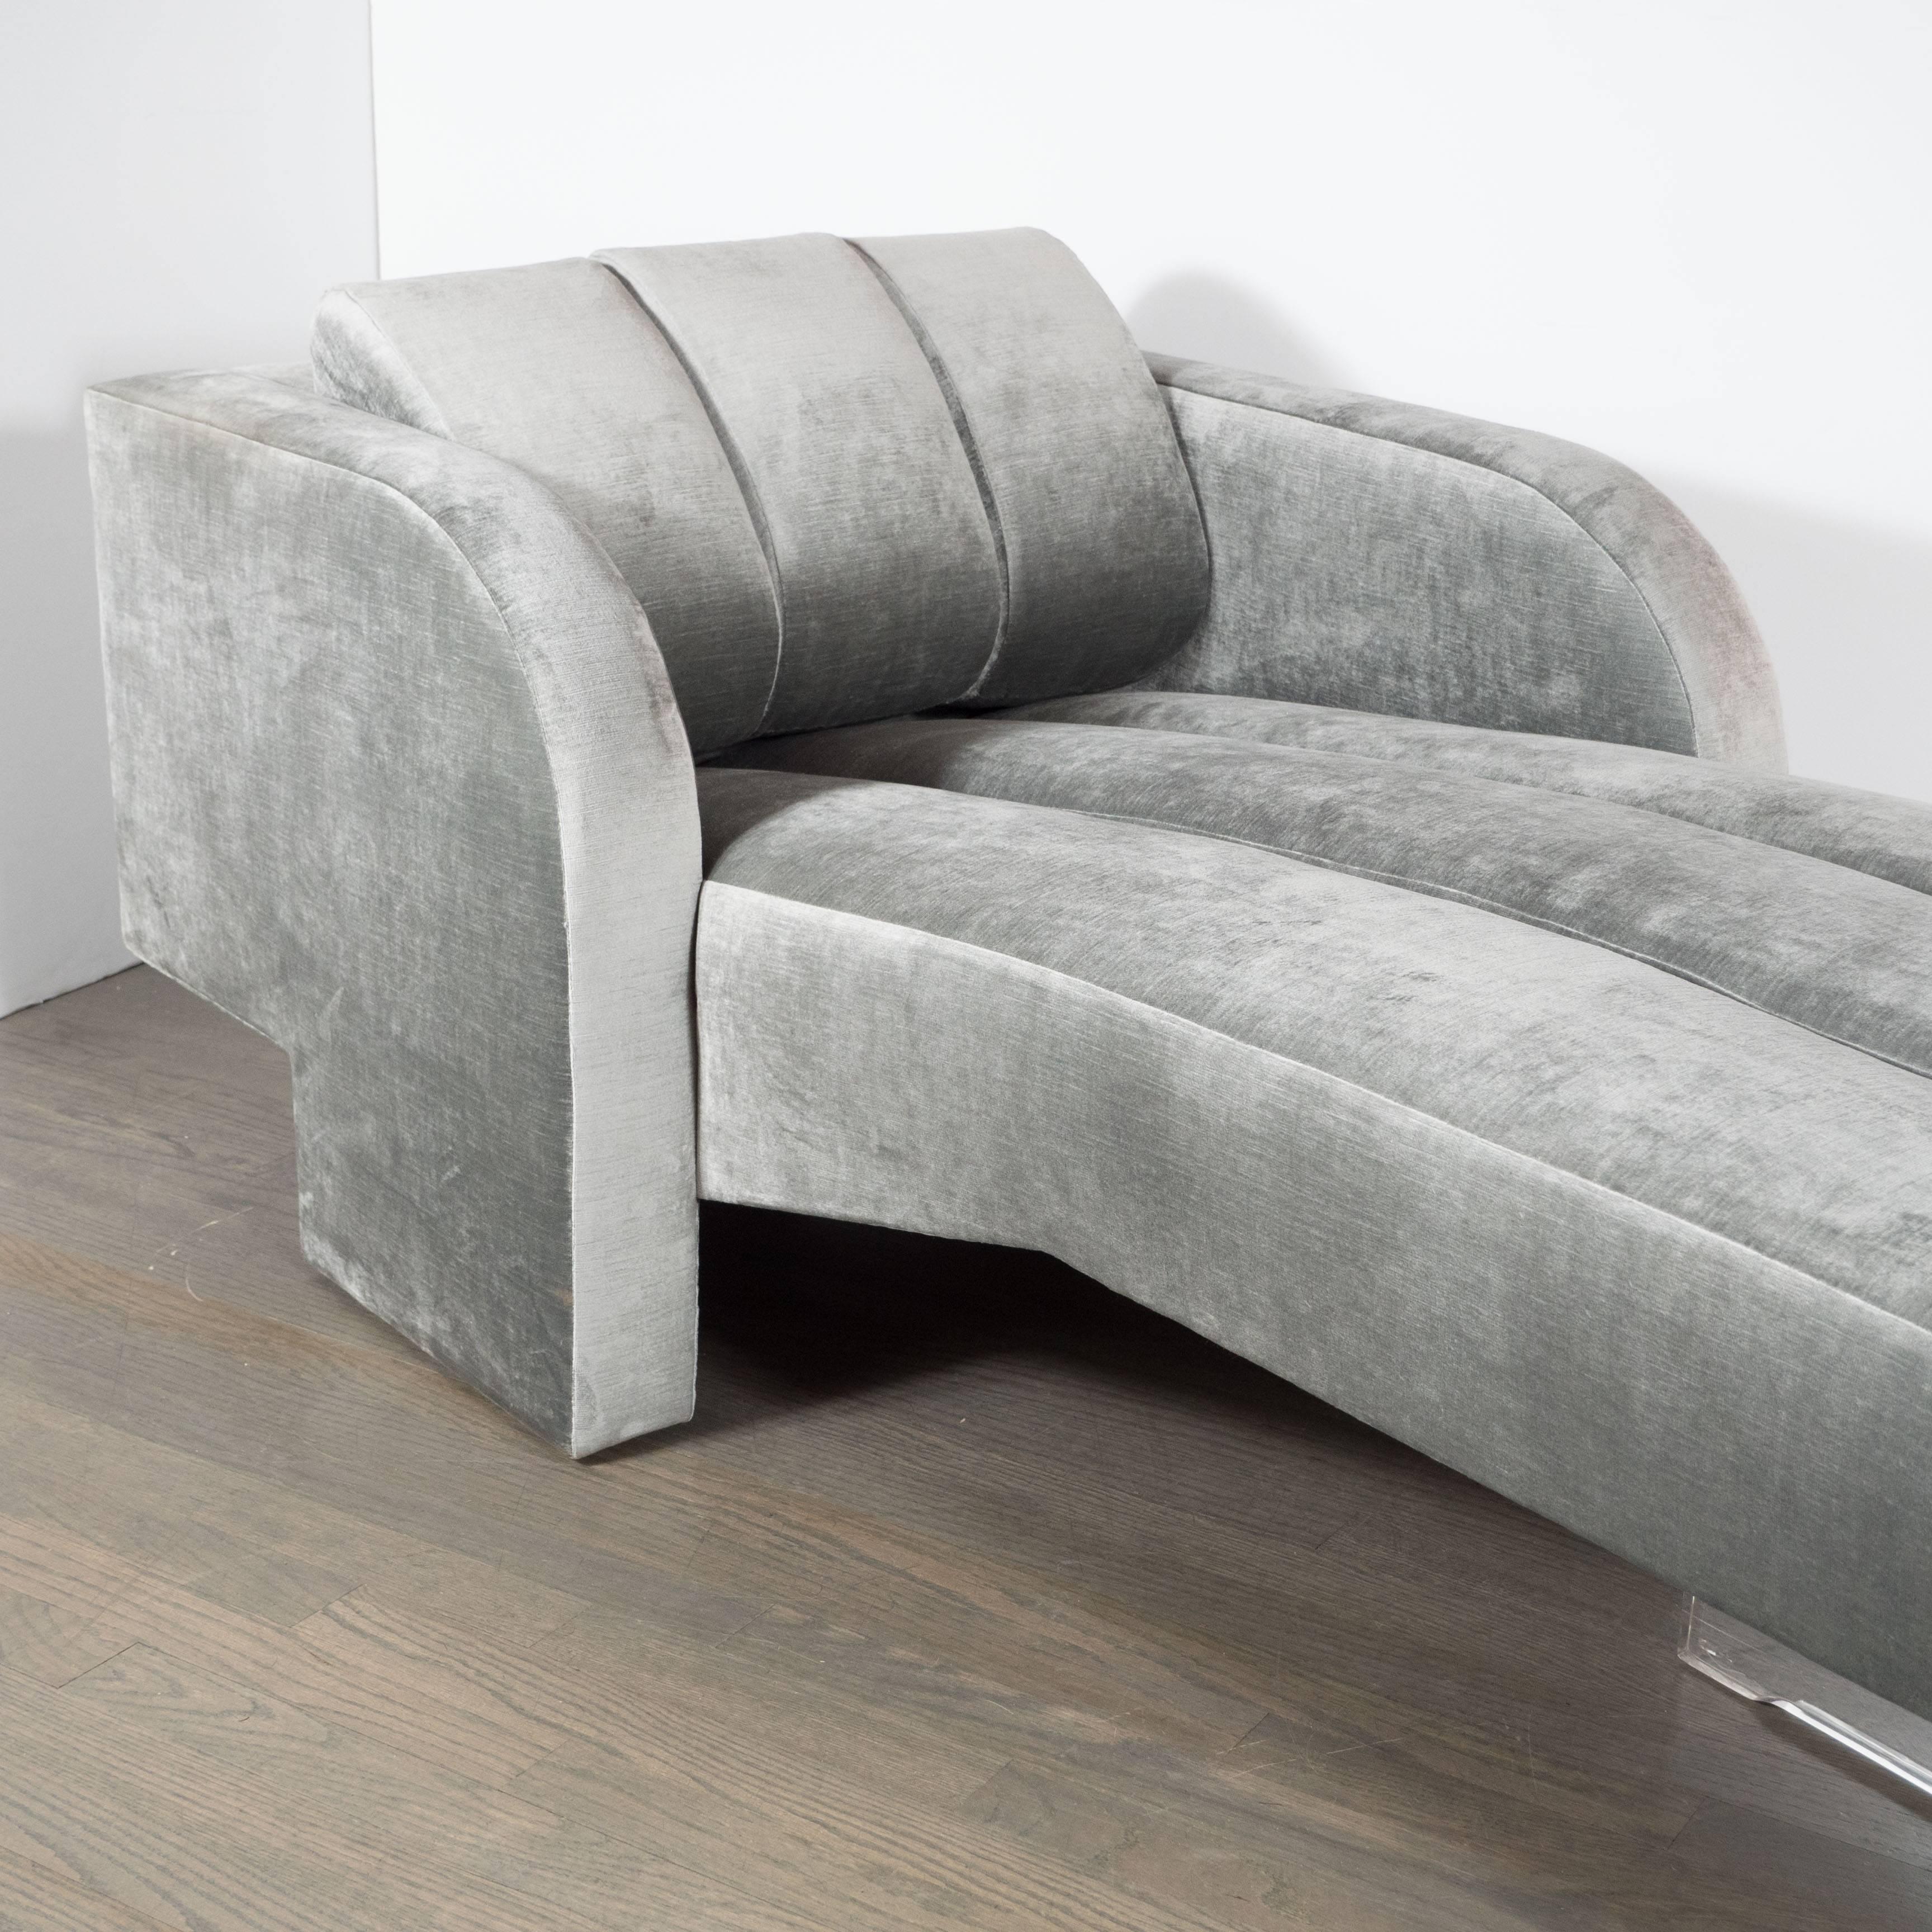 Late 20th Century Luxe Mid-Century Velvet Chaise Longue from the Omnibus Series by Vladimir Kagan